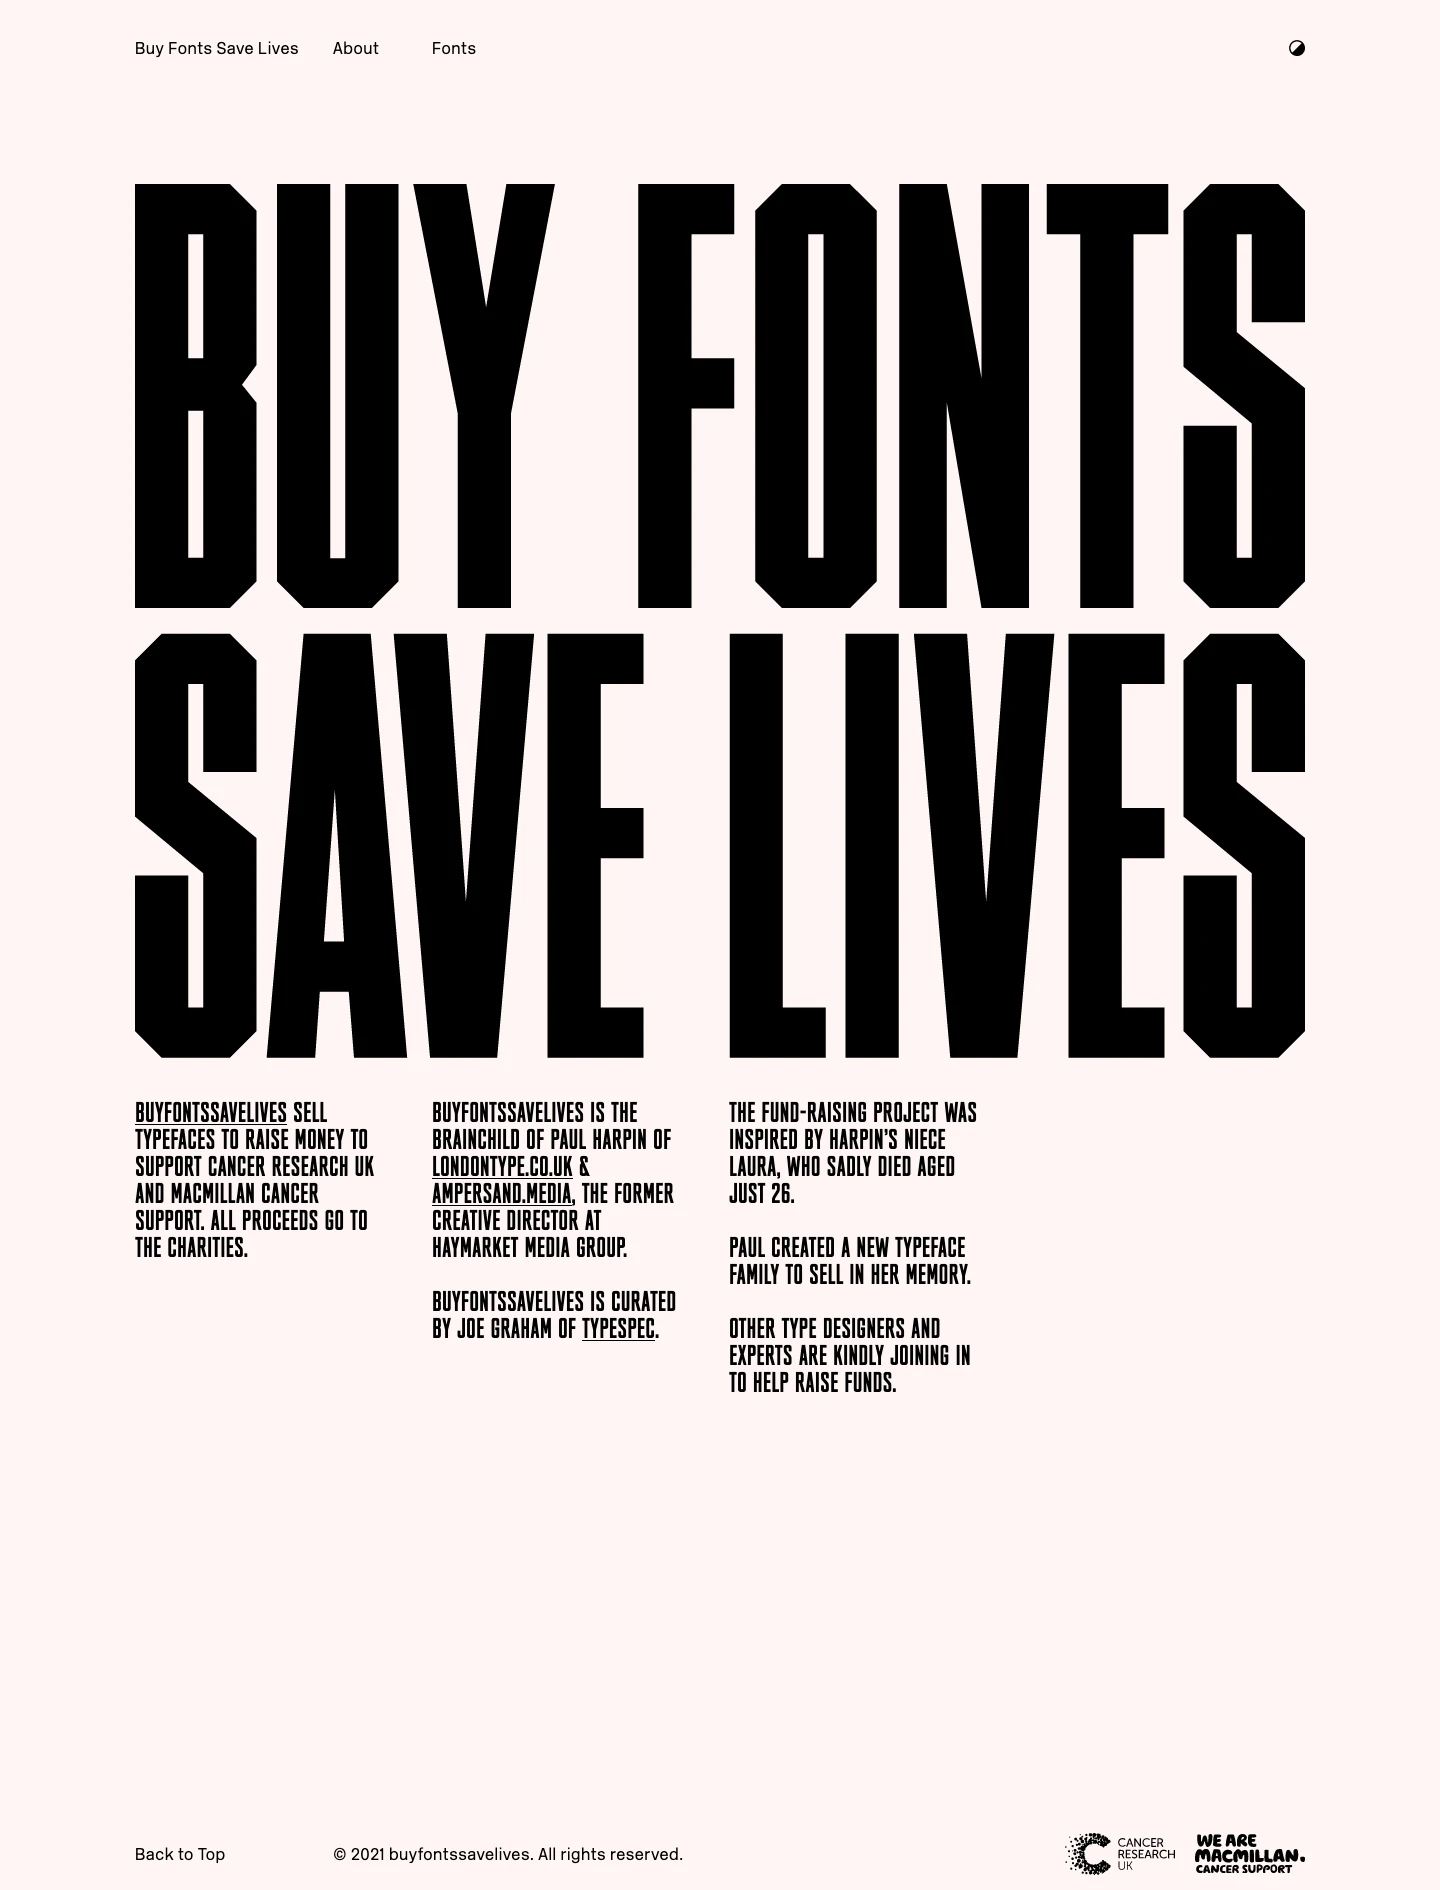 Buy Fonts Save Lives Landing Page Example: Buy Fonts Save Lives Sell typefaceS to raise money to Support cancer reSearch uk and macmillan cancer Support. All proceedS go to the charitieS.